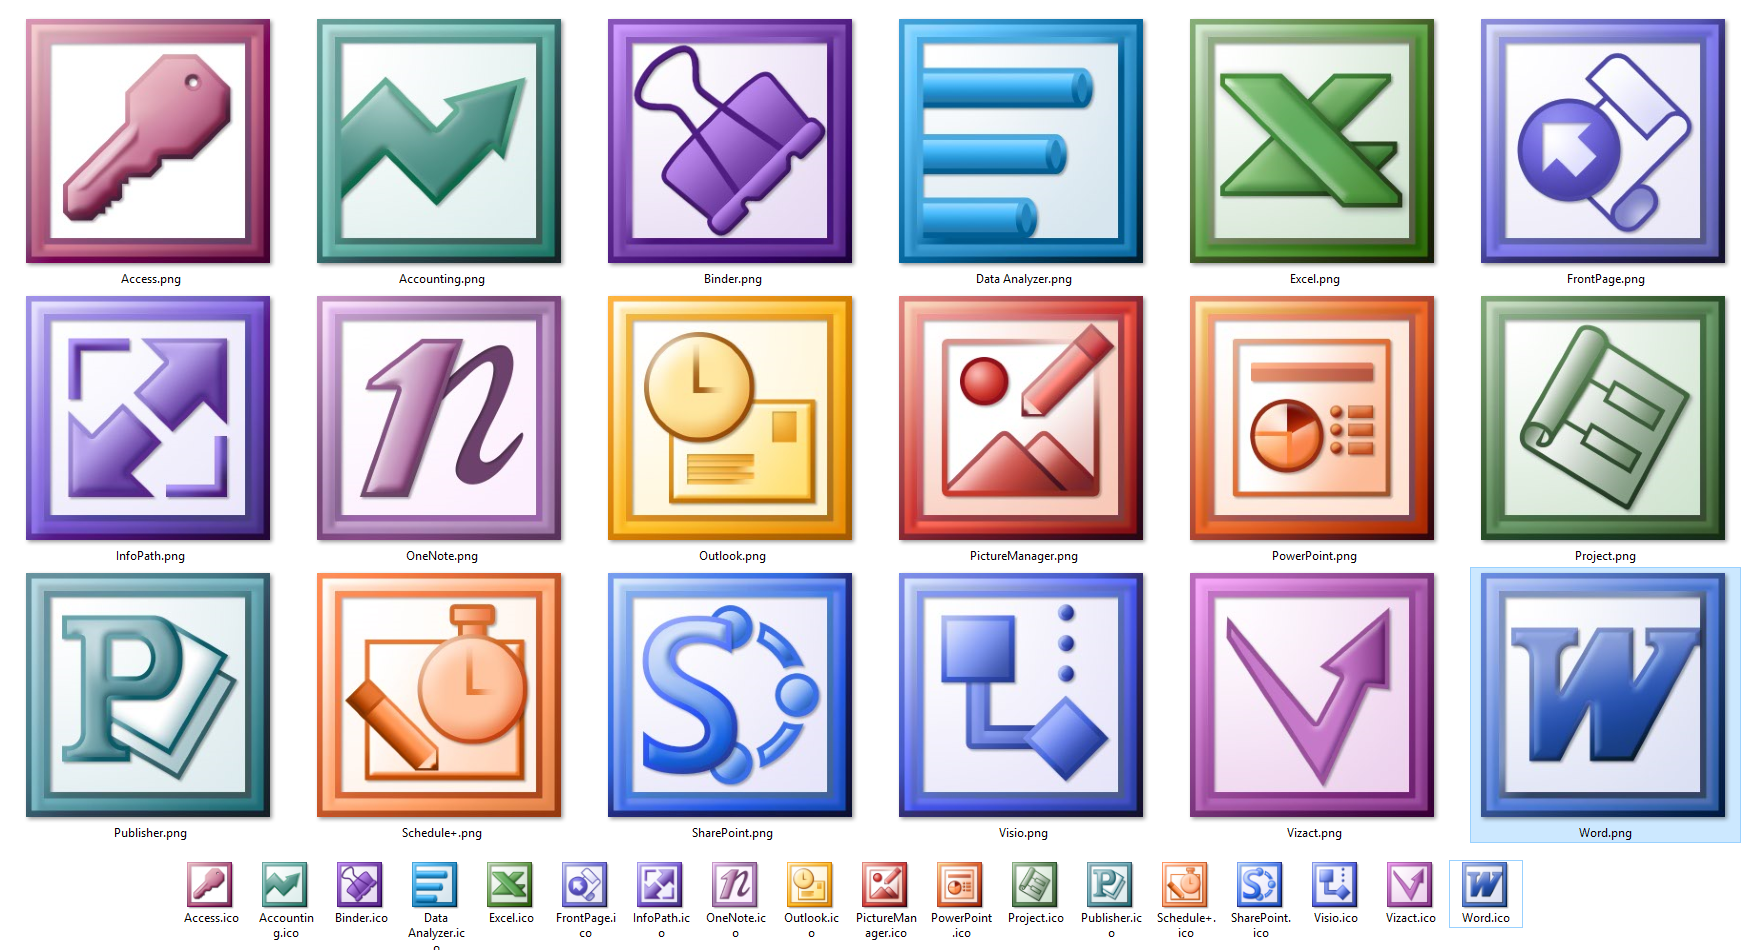 Microsoft Office 2003 ALL Icons HD by Master-Bit on DeviantArt